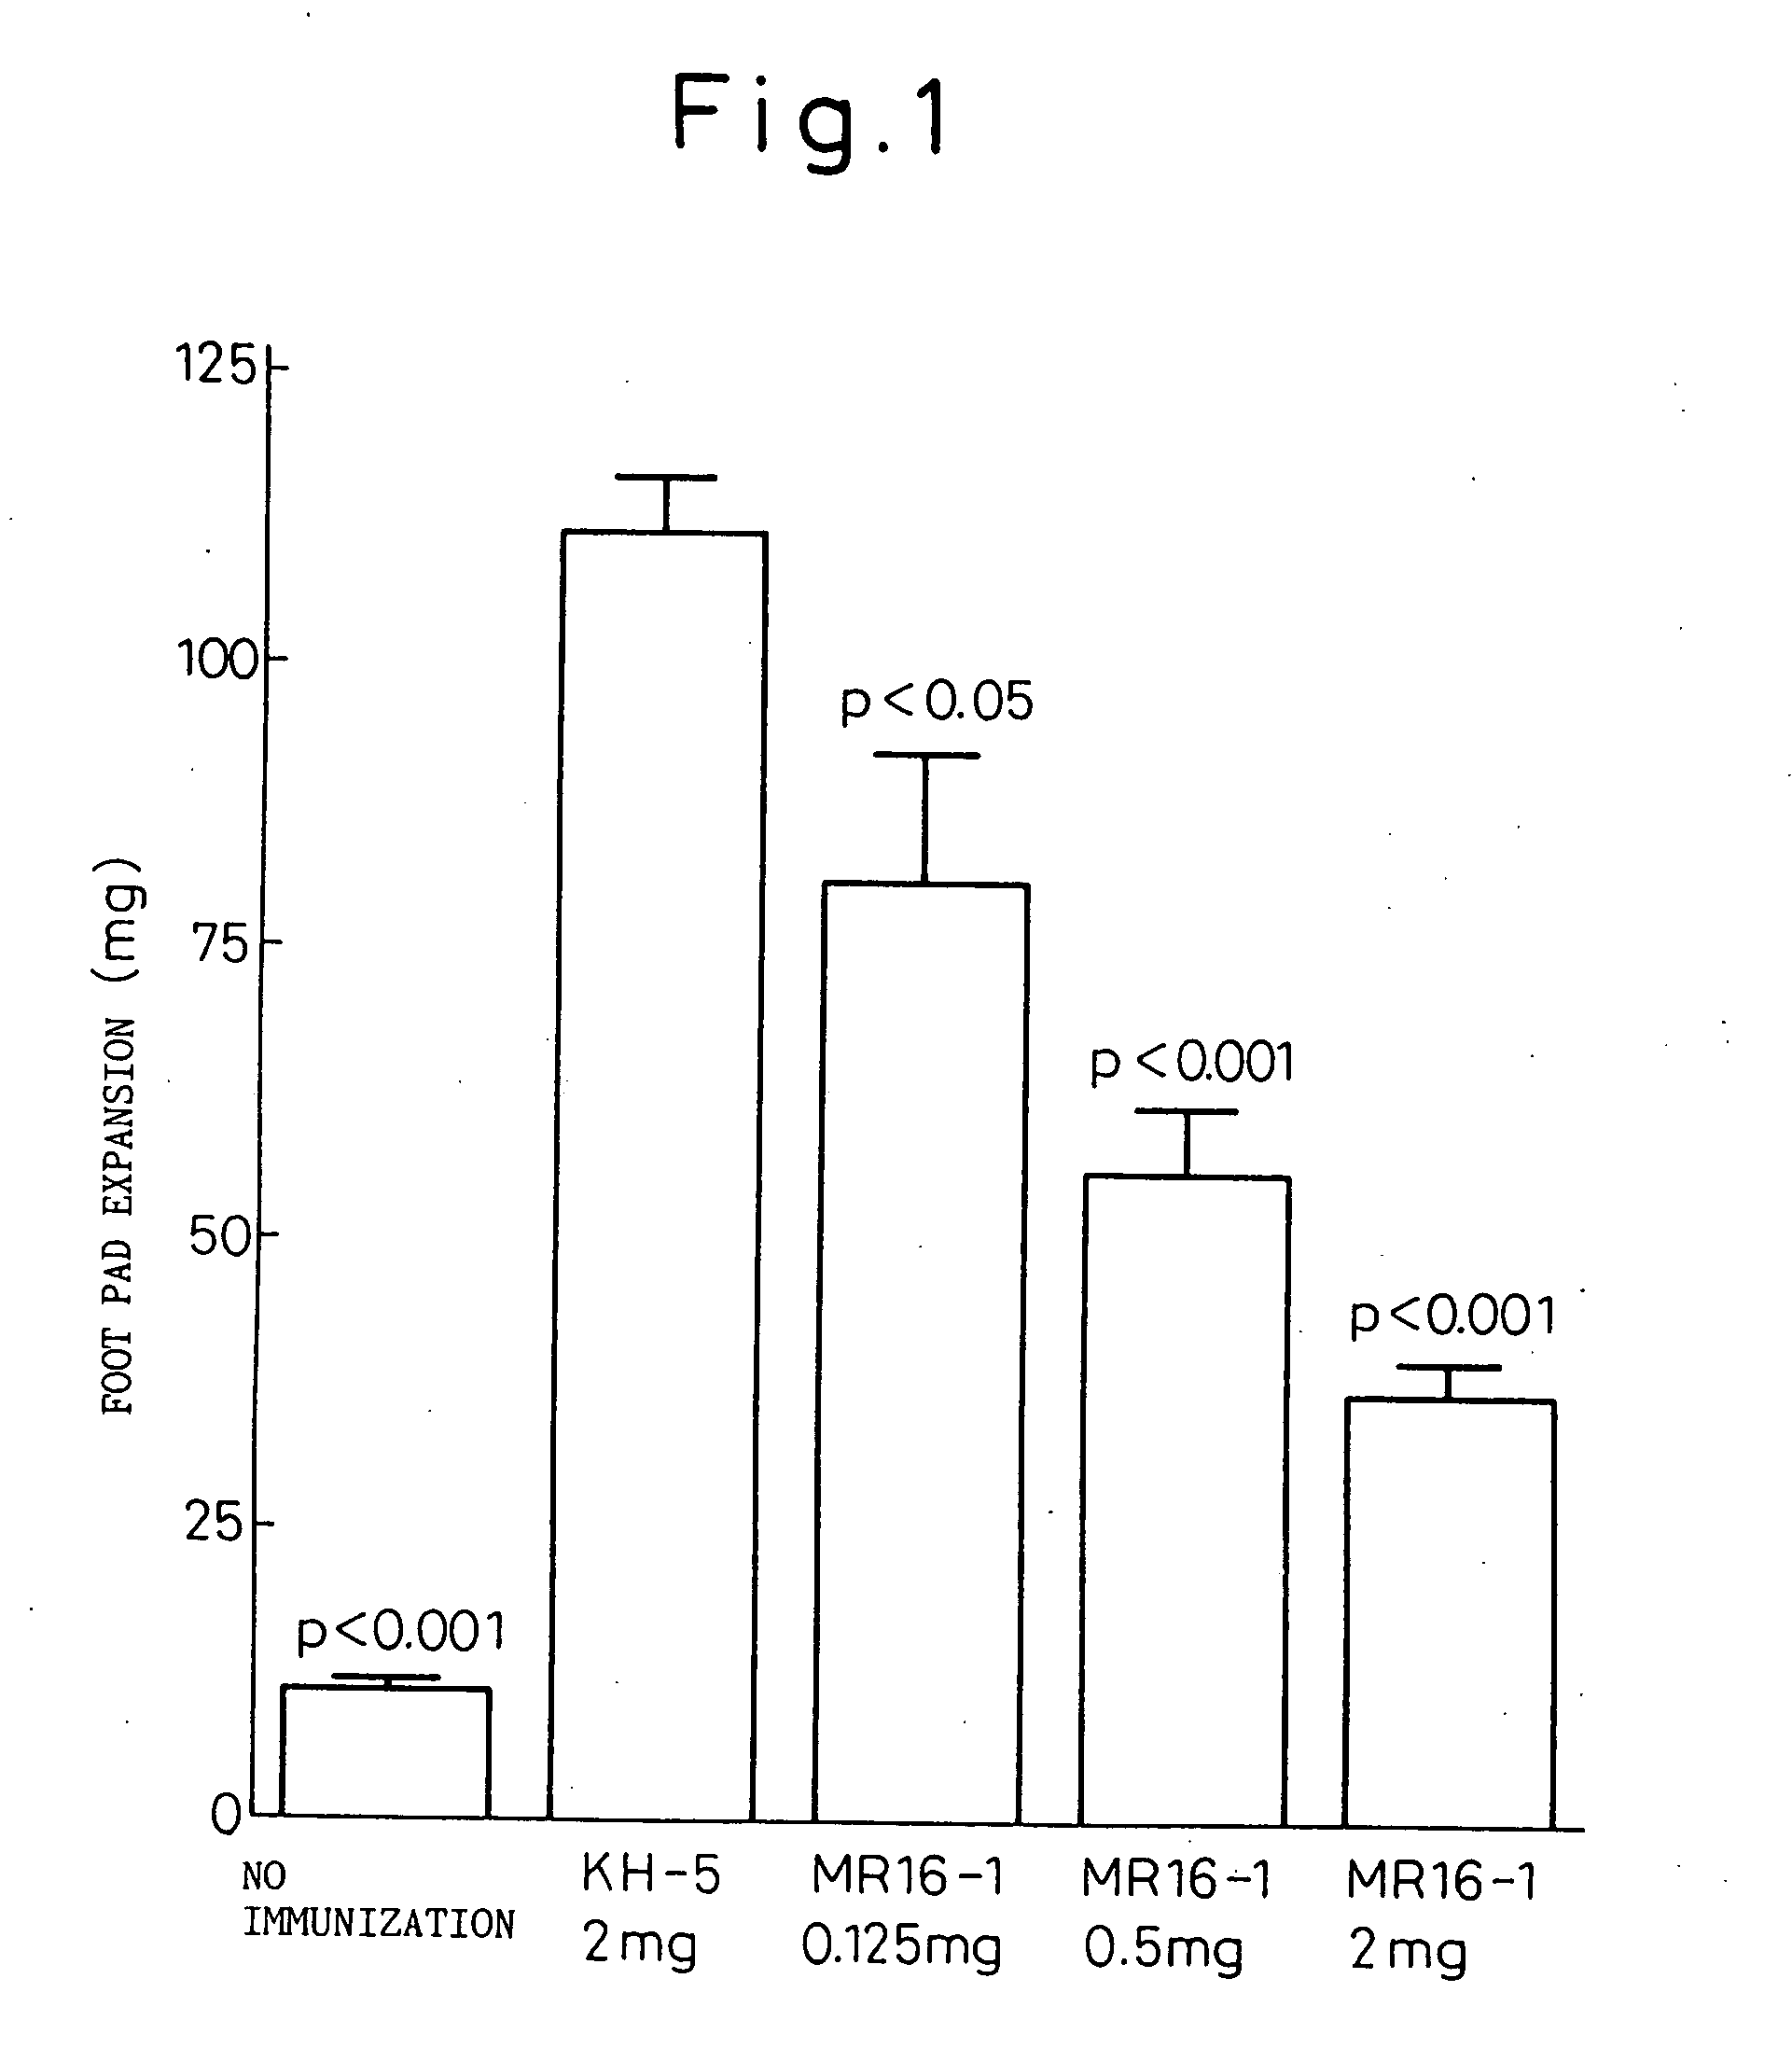 Preventive or therapeutic agent for sensitized T cell-mediated diseases comprising IL-6 antagonist as an active ingredient